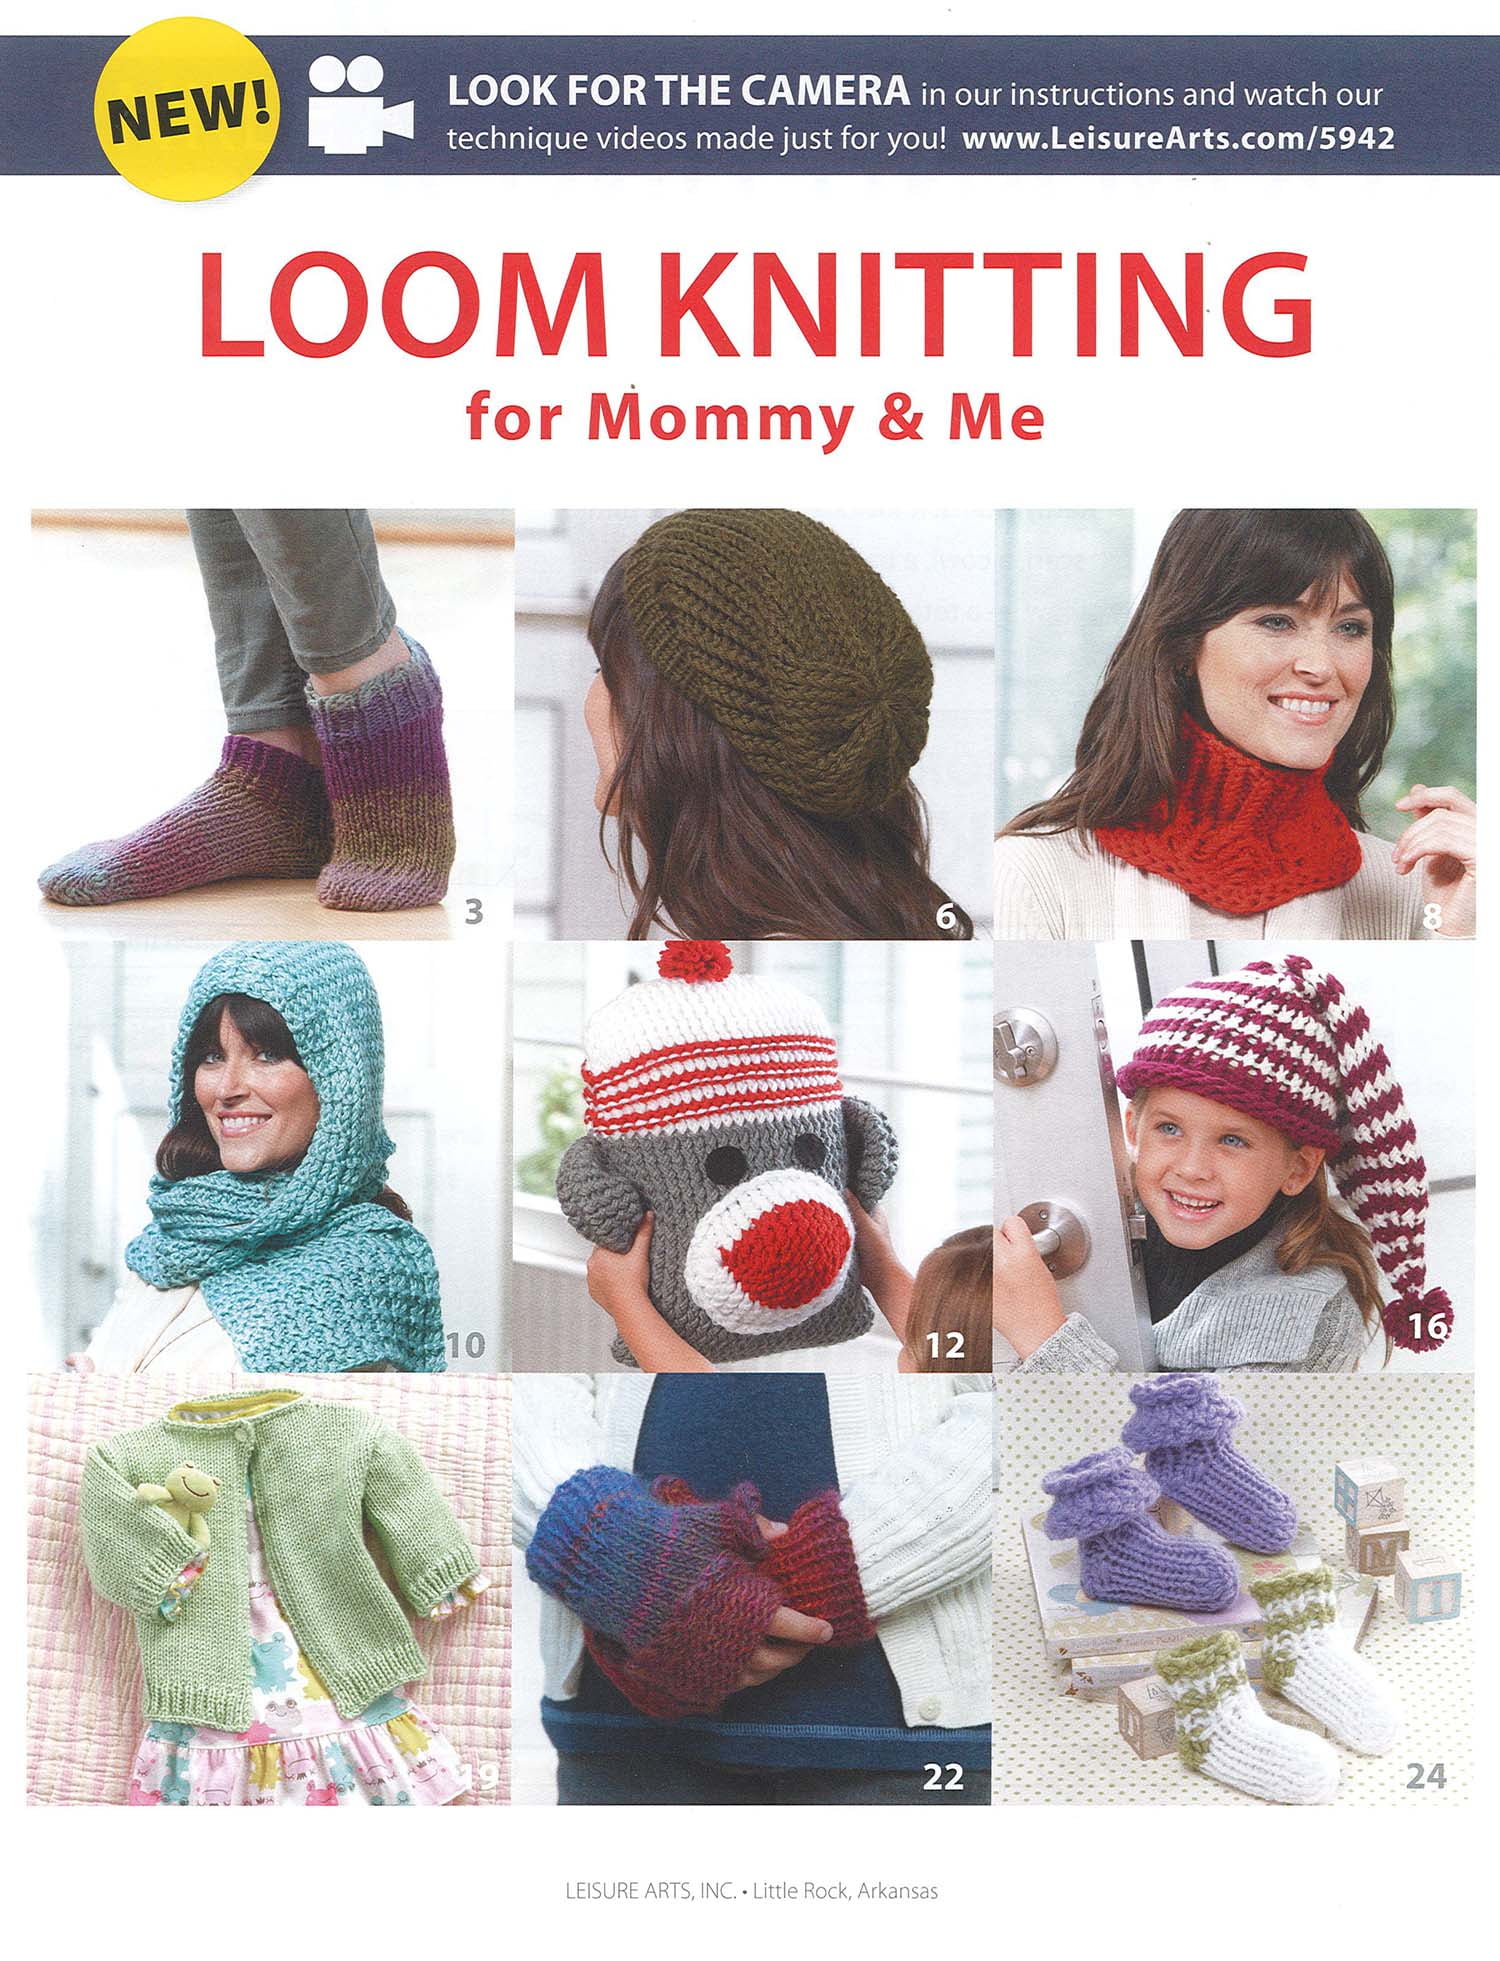 How to Knit with a serenity loom « Knitting & Crochet :: WonderHowTo